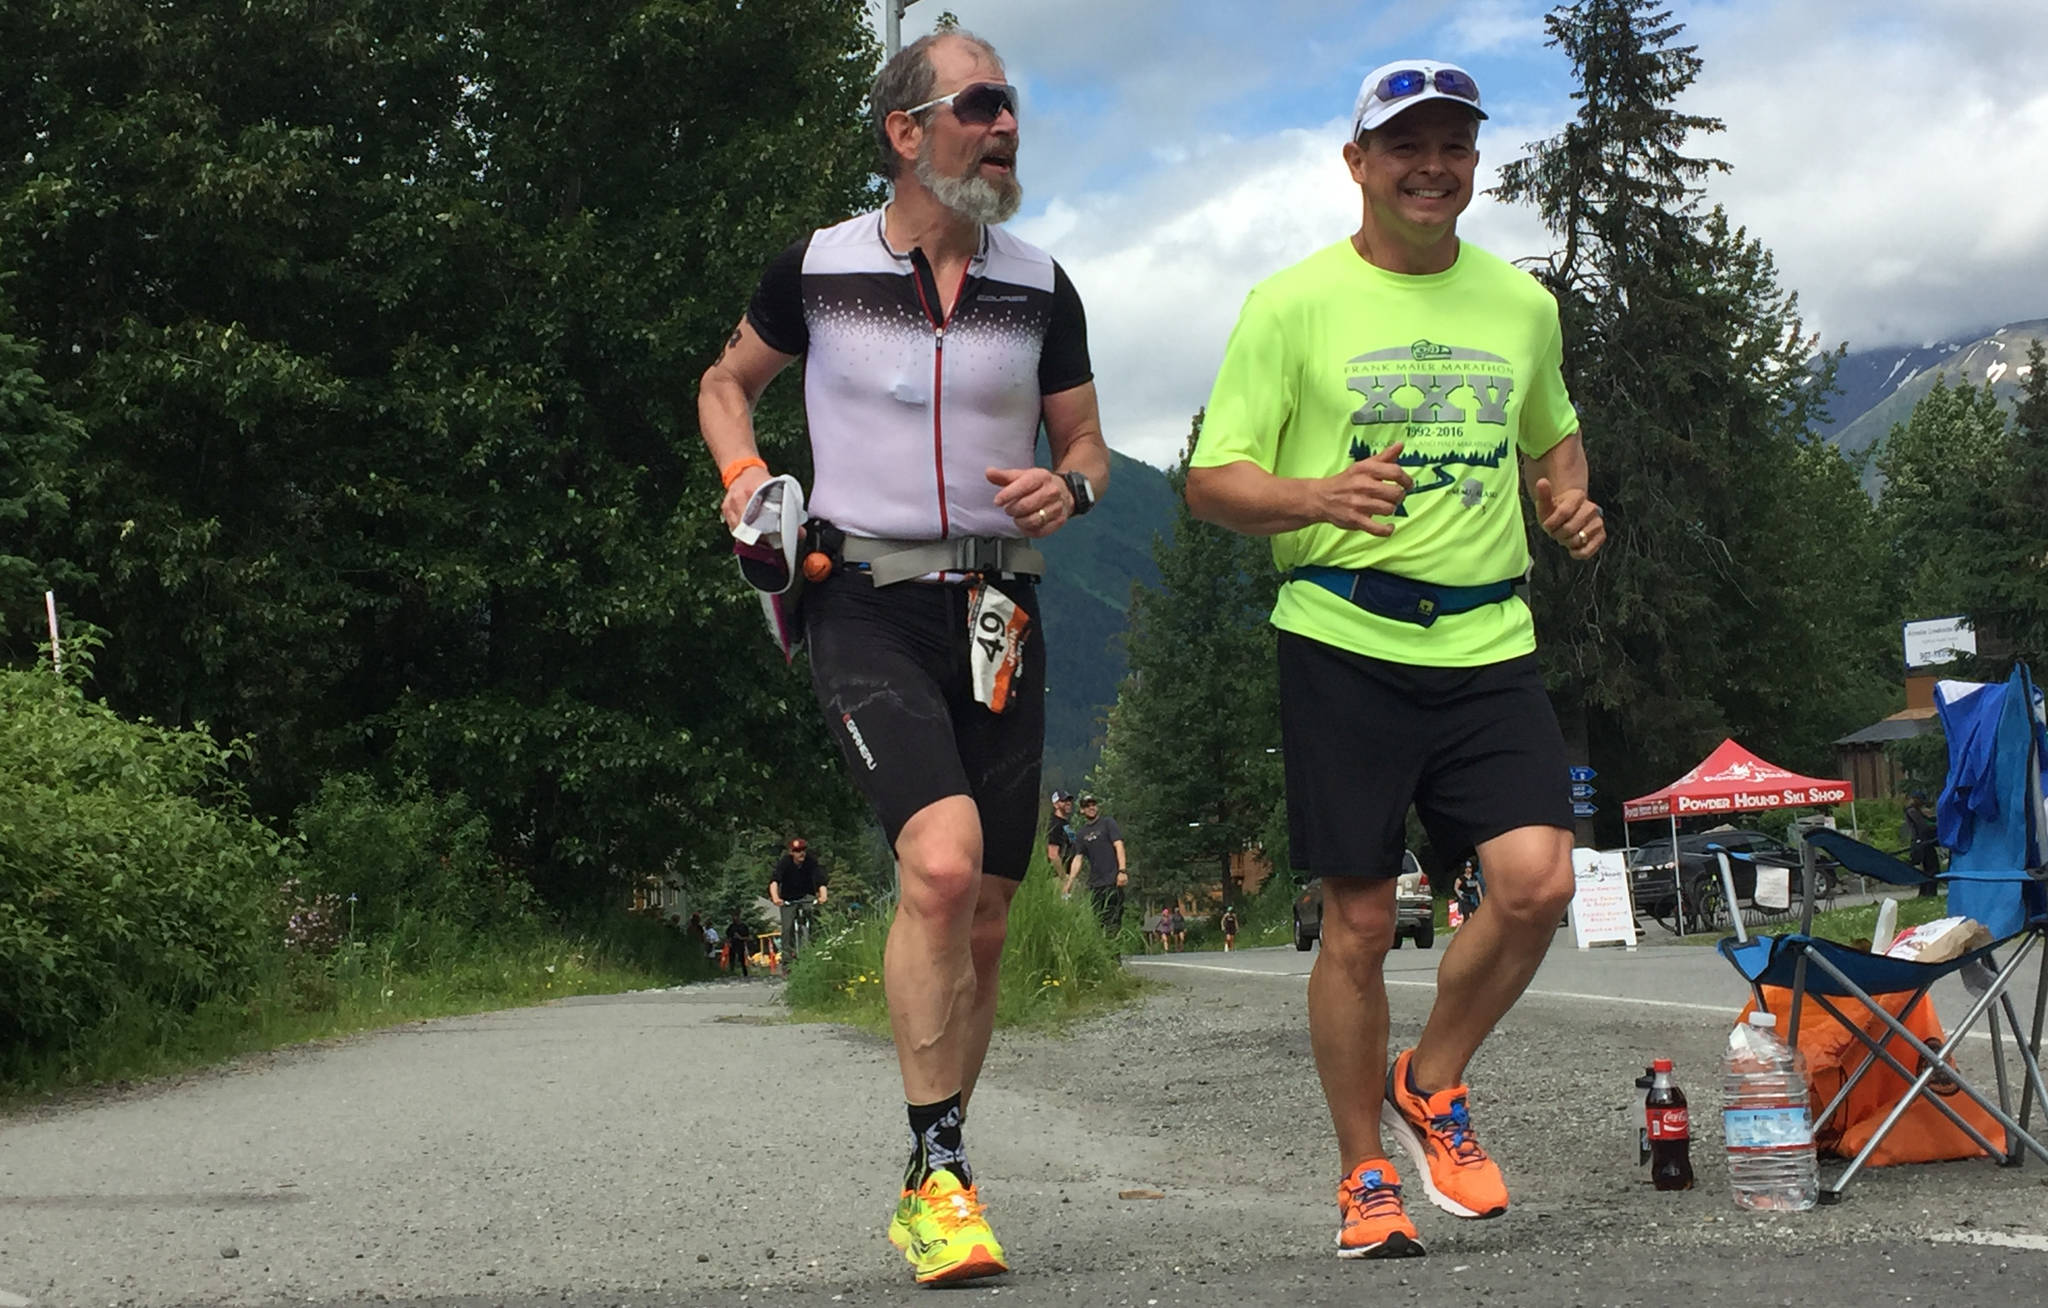 Juneau resident John Bursell (left) reaches mile 20 of the Alaskaman Extreme Triathlon on Saturday, July 15, alongside support crew member Darren Booton (right). Bursell was the top finisher from Juneau, coming in 19th place out of 151 finishers. (Photo courtesy of Jamie Bursell)